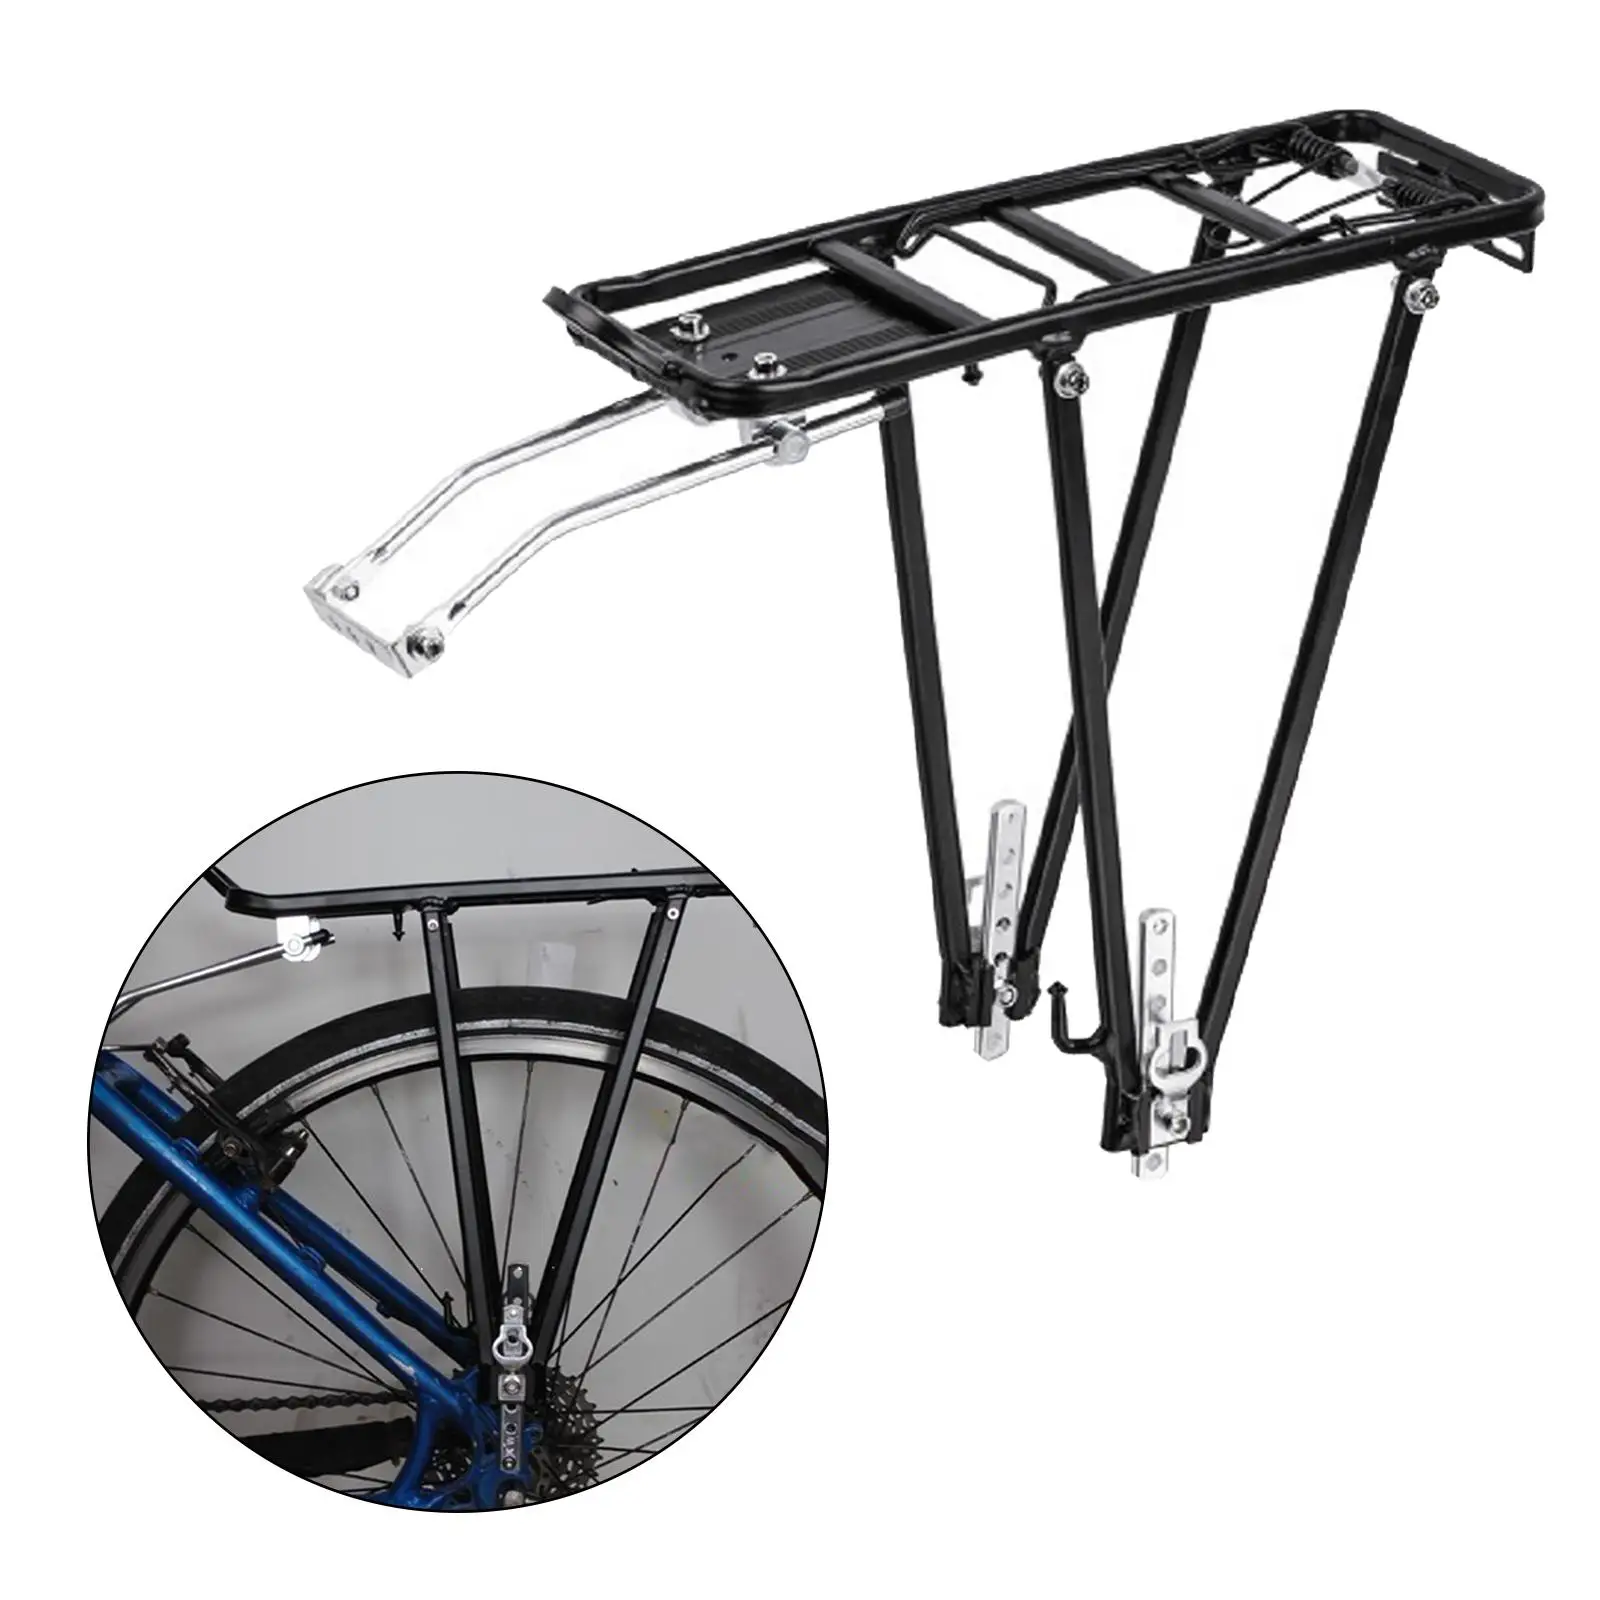 Rear Bicycle Bike Rack Luggage Carrier Shelf Rear Seat Post Rack Frame Bracket for Easy to Install